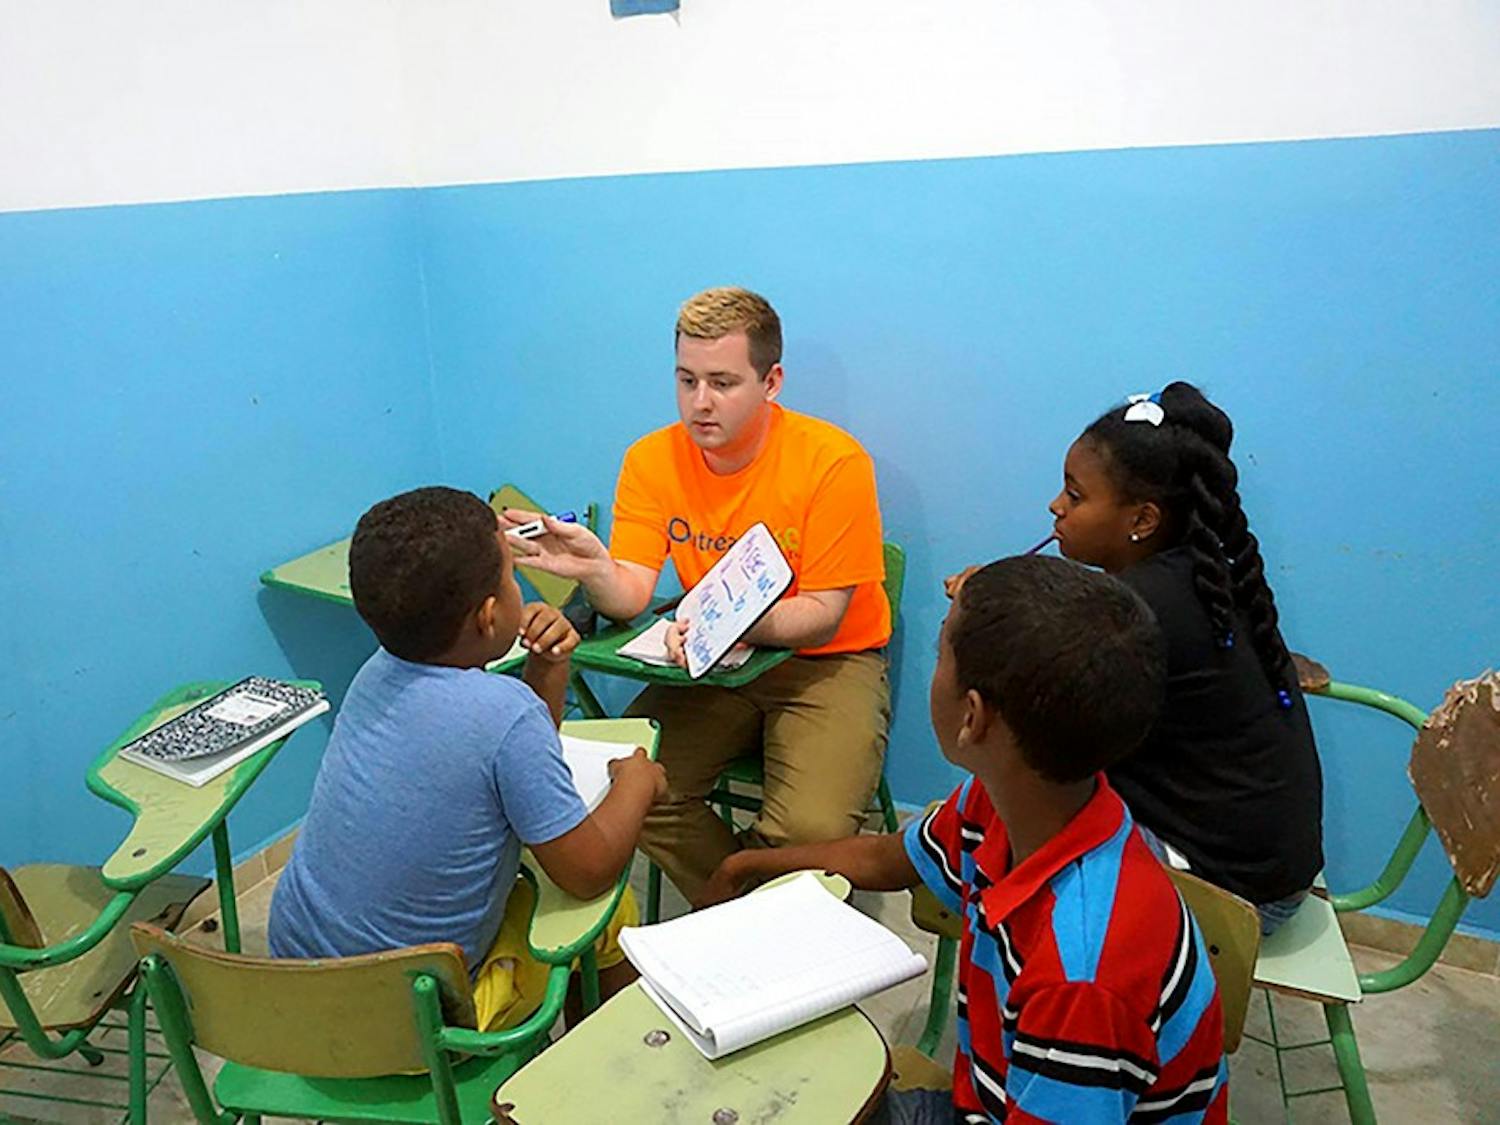 UB's Office of Engagement offers alternative breaks for students to participate in. Gunnar Haberl, on his trip to the Dominican Republic, taught local students English as a second language.